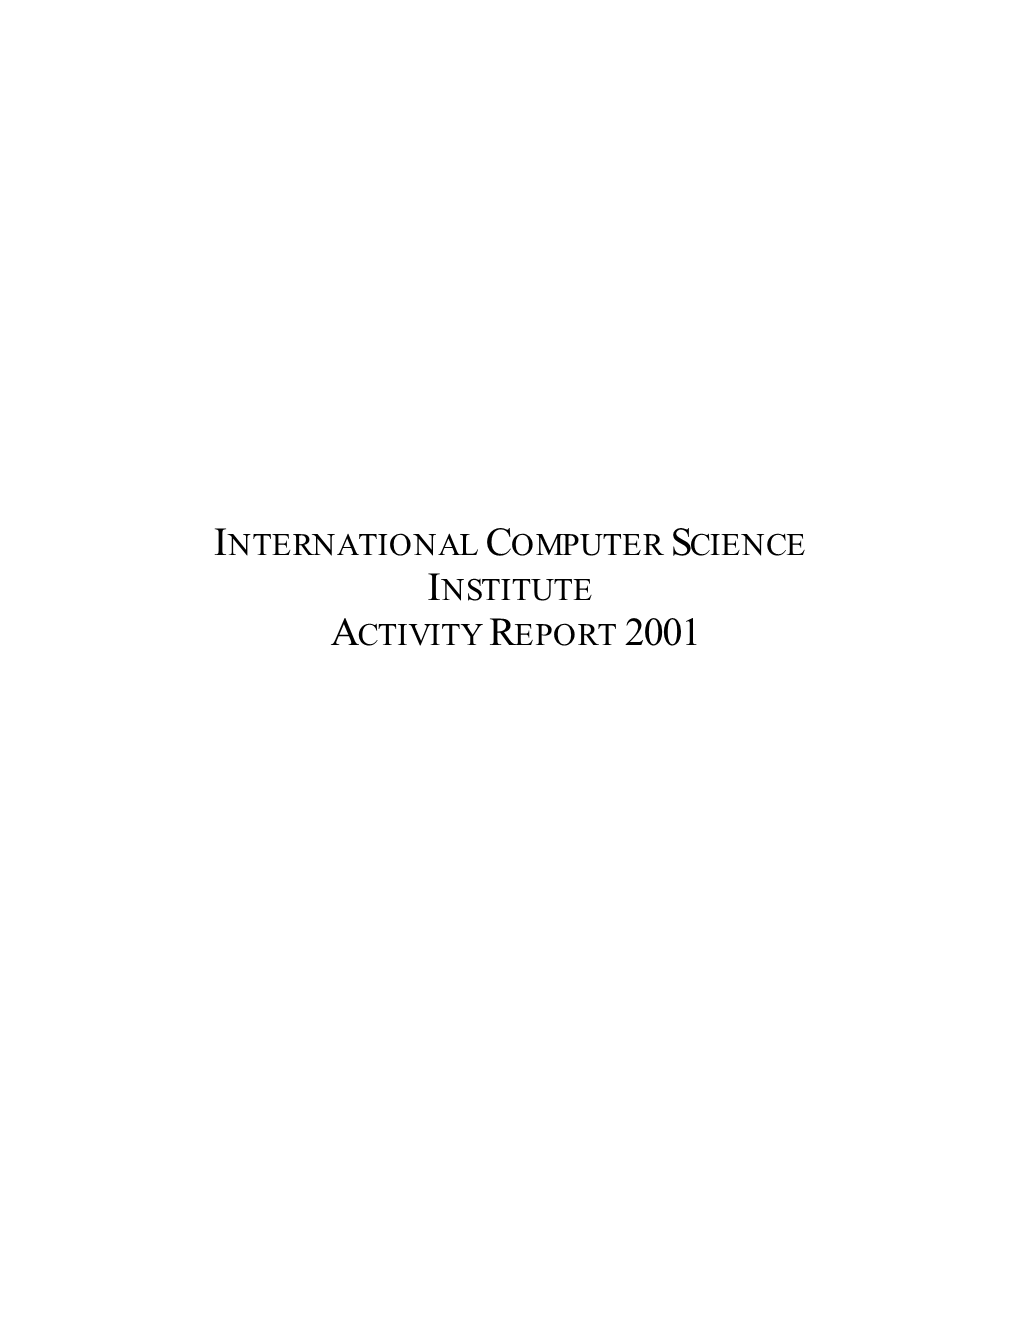 International Computer Science Institute Activity Report 2001 Contact Information